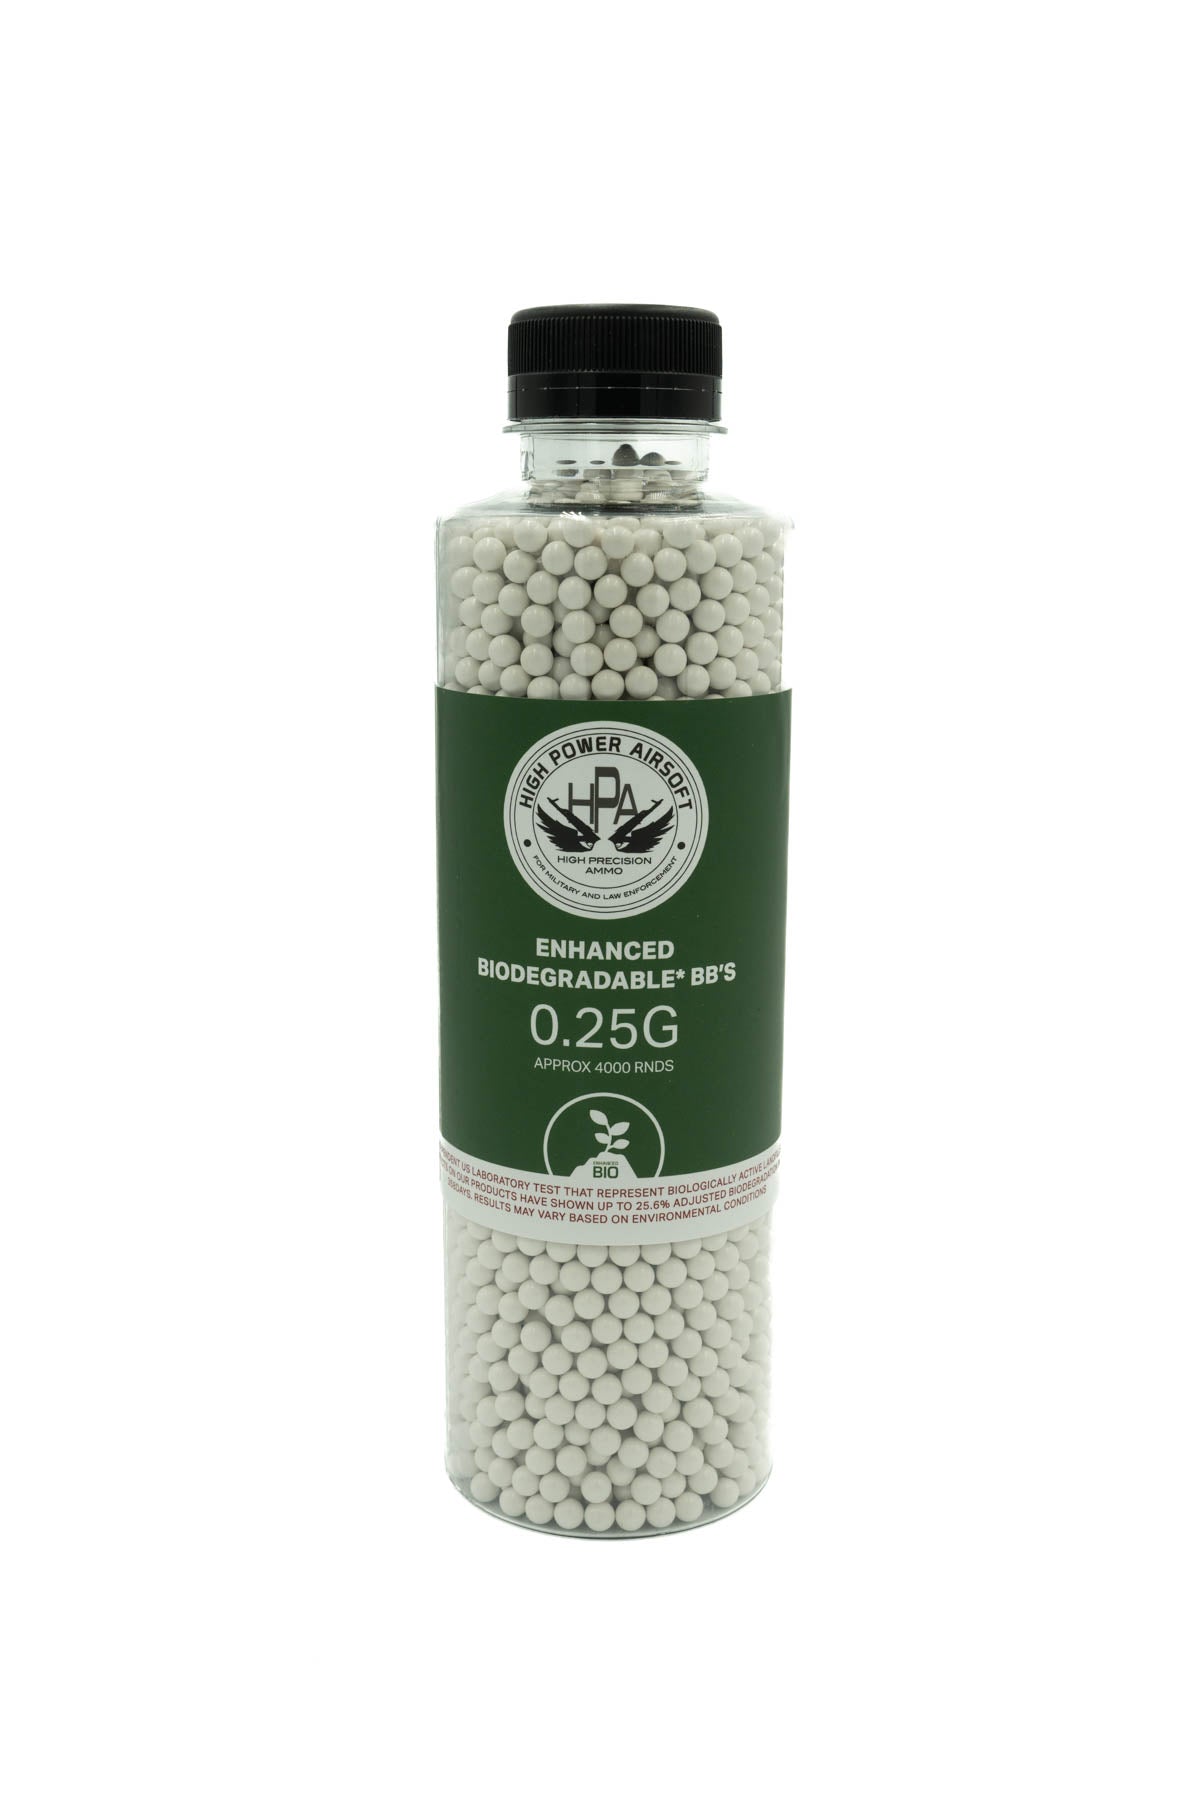 HPA 0.25G Enhanced Biodegradable BB (Approx 4,000rds)